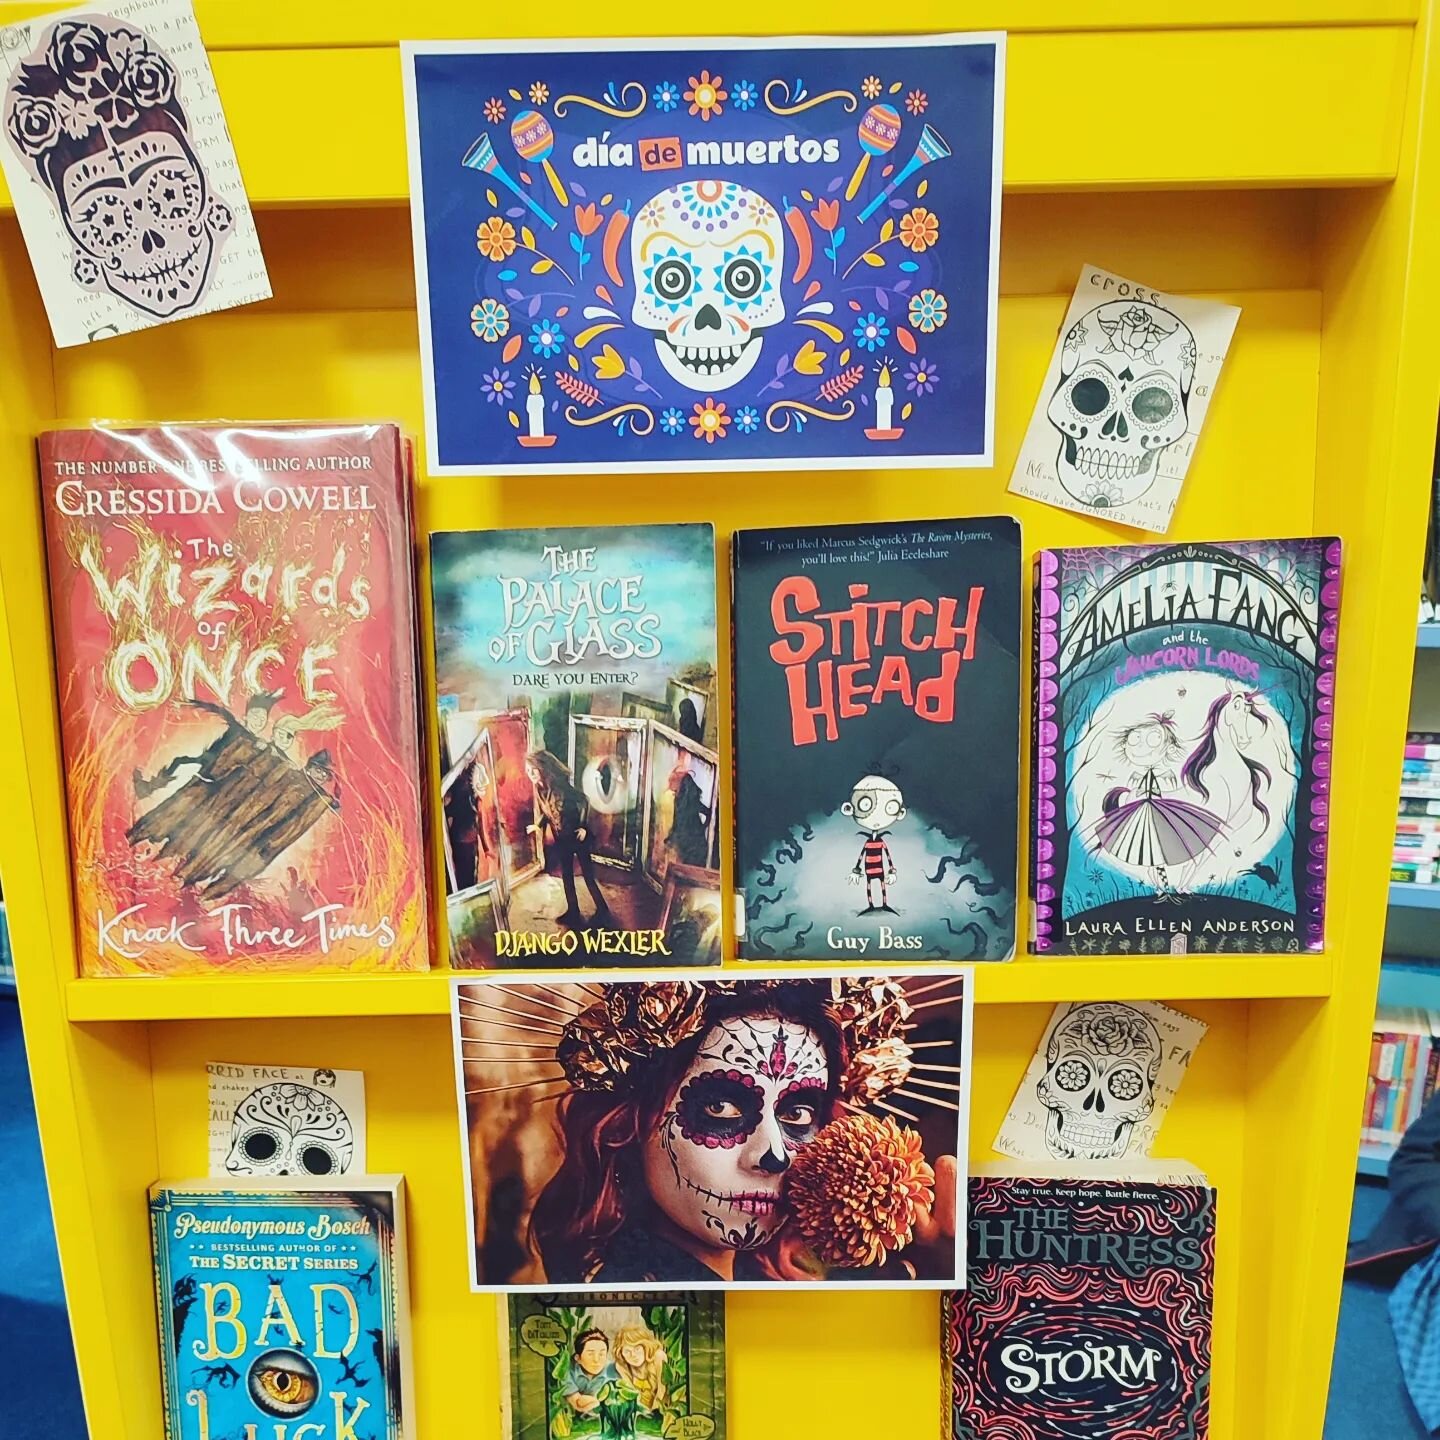 Find out about &quot;d&iacute;as de los muertos&quot; in our library. Plenty of scary stories... but are you brave enough??? #itsaststneotsthing